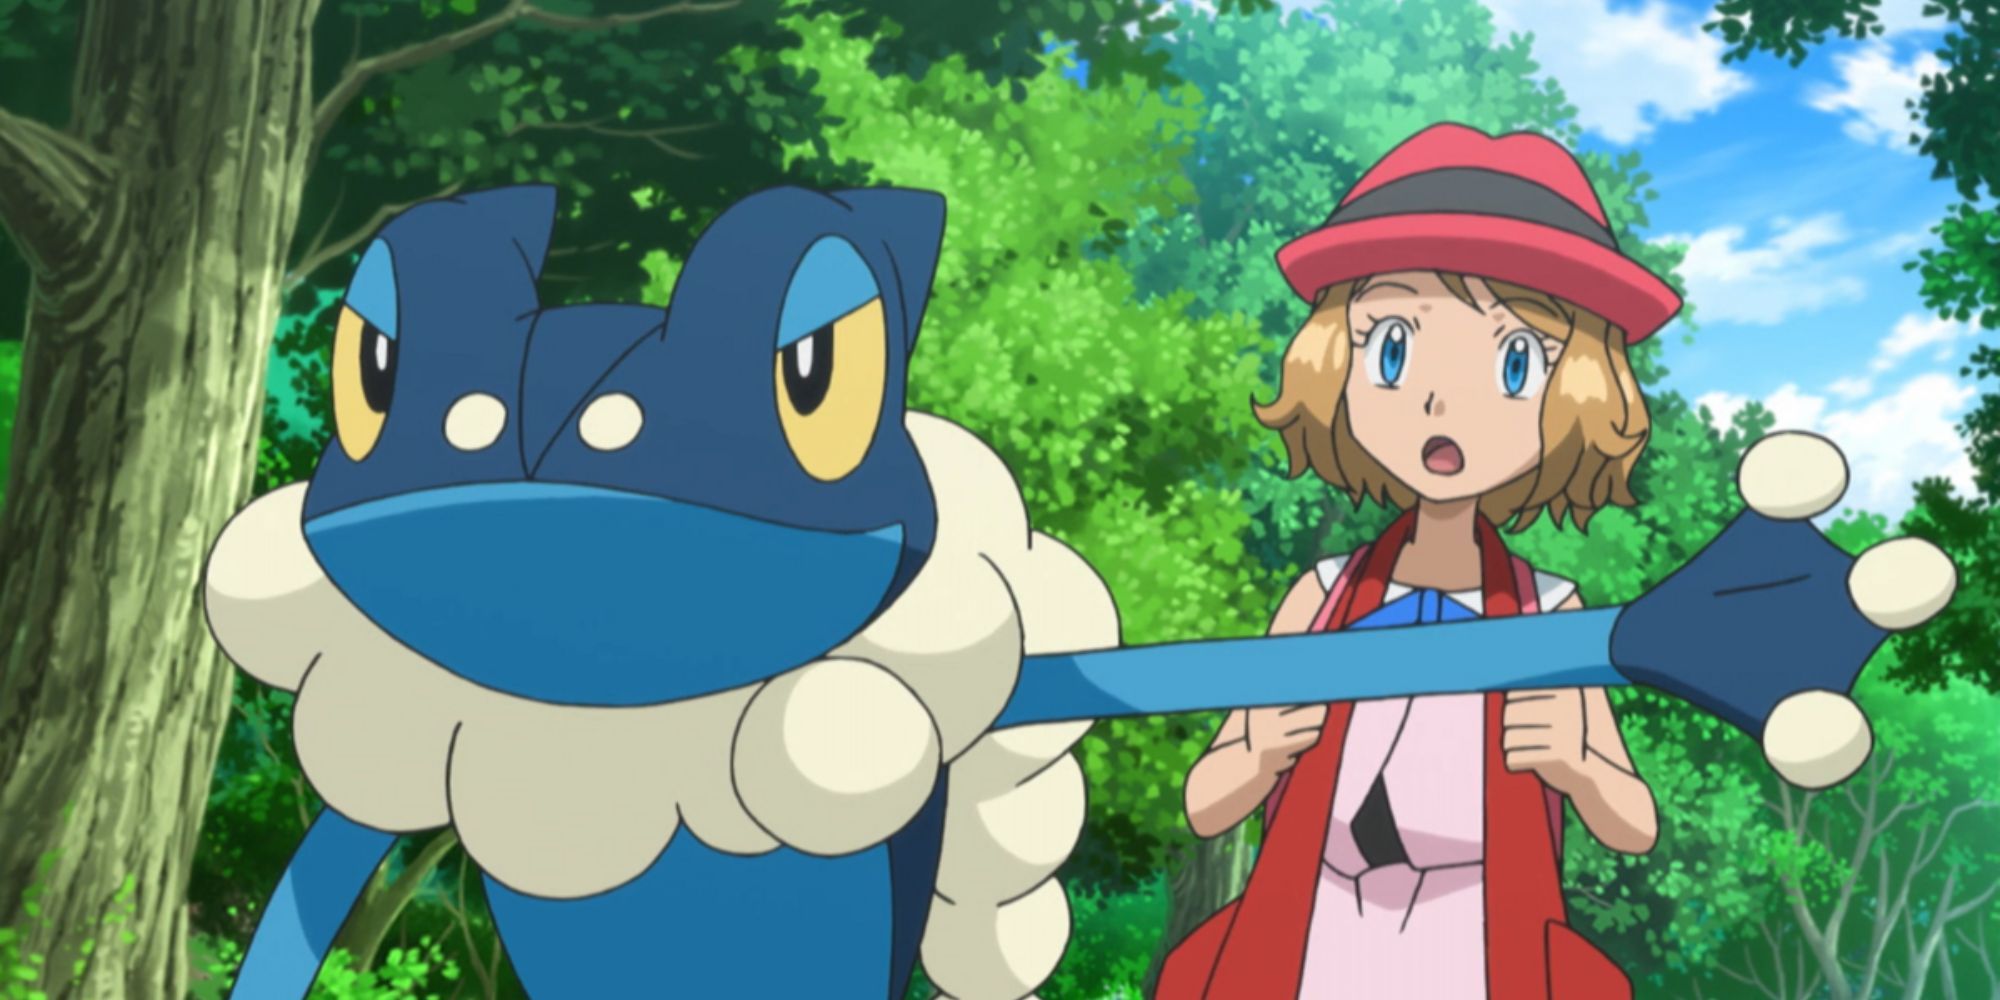 Ash's Frogadier protects Serena.